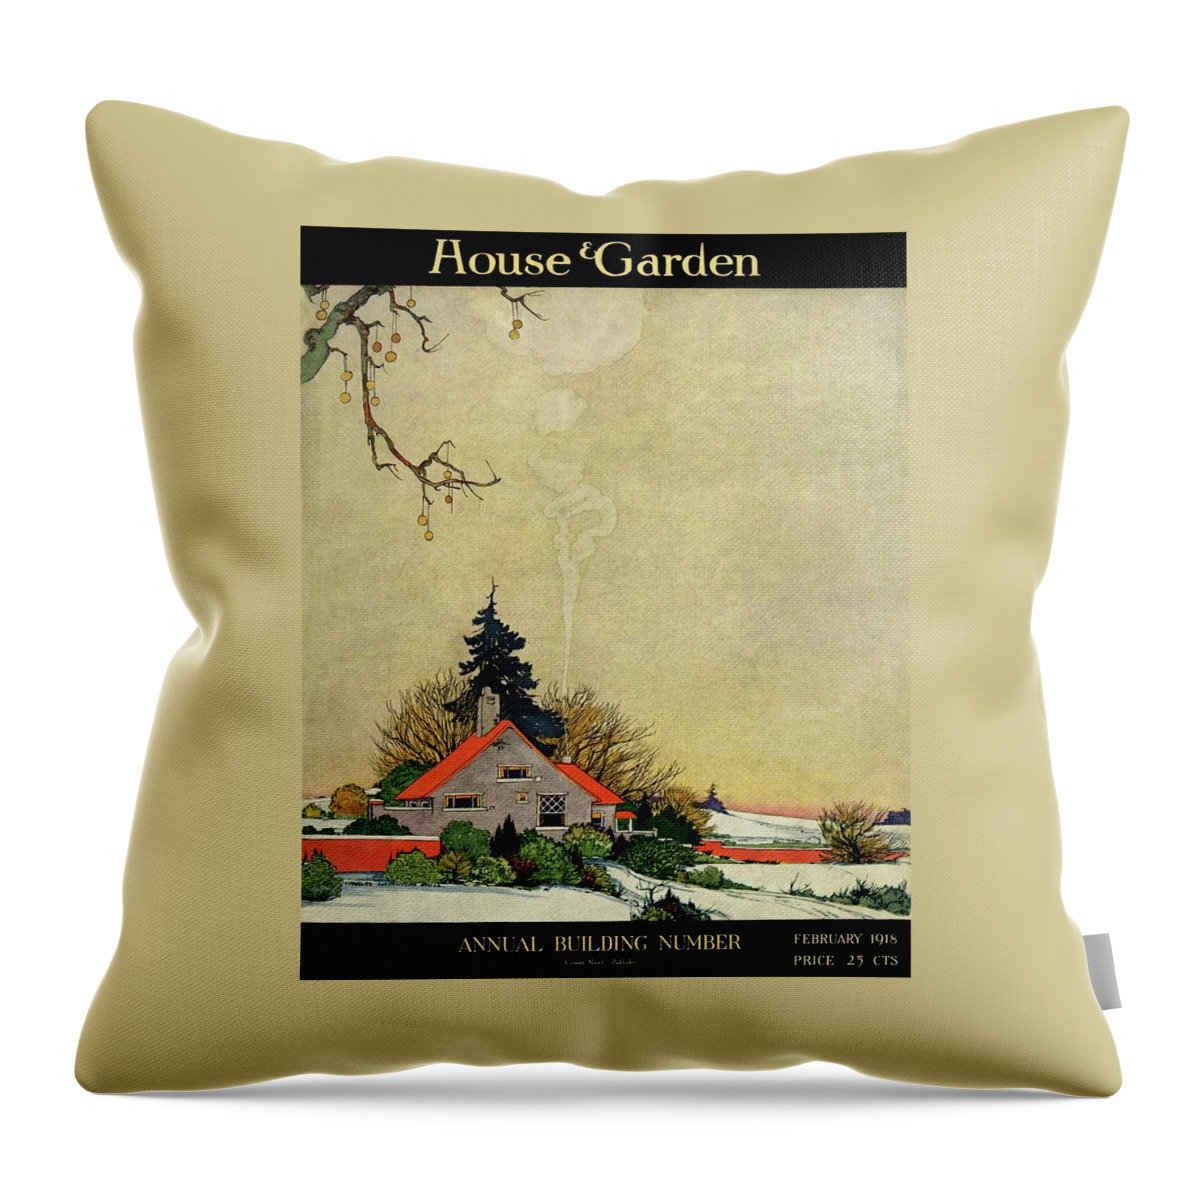 House And Garden Annual Building Number Cover Throw Pillow